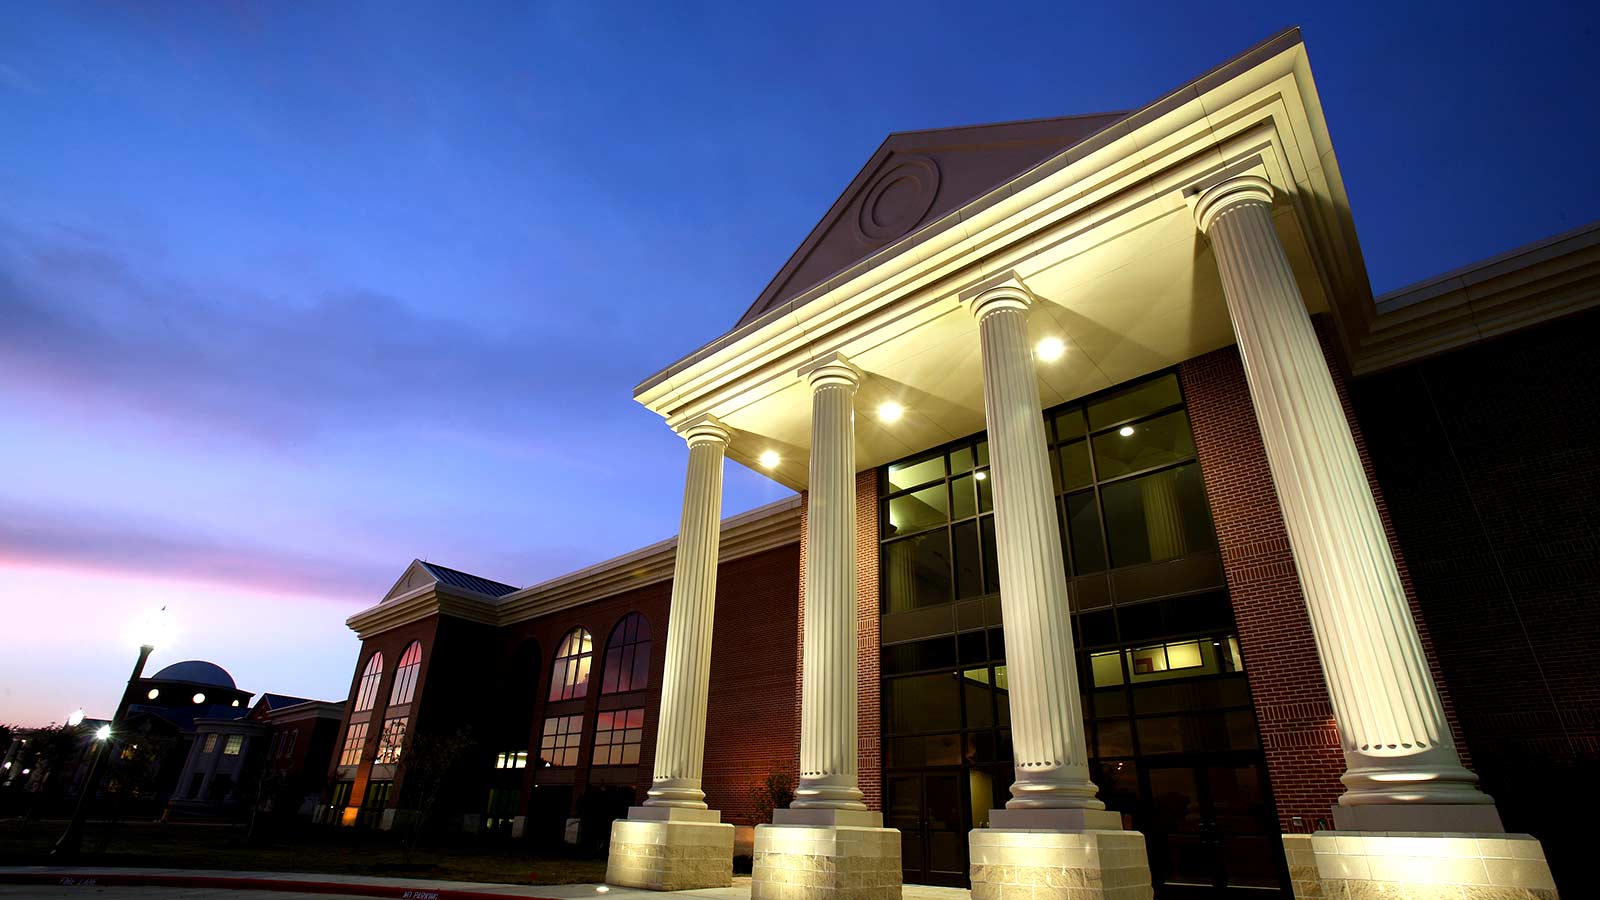 The Simpson Athletics and Academic Center is the centerpiece of the Highers Athletics Complex at Baylor University.